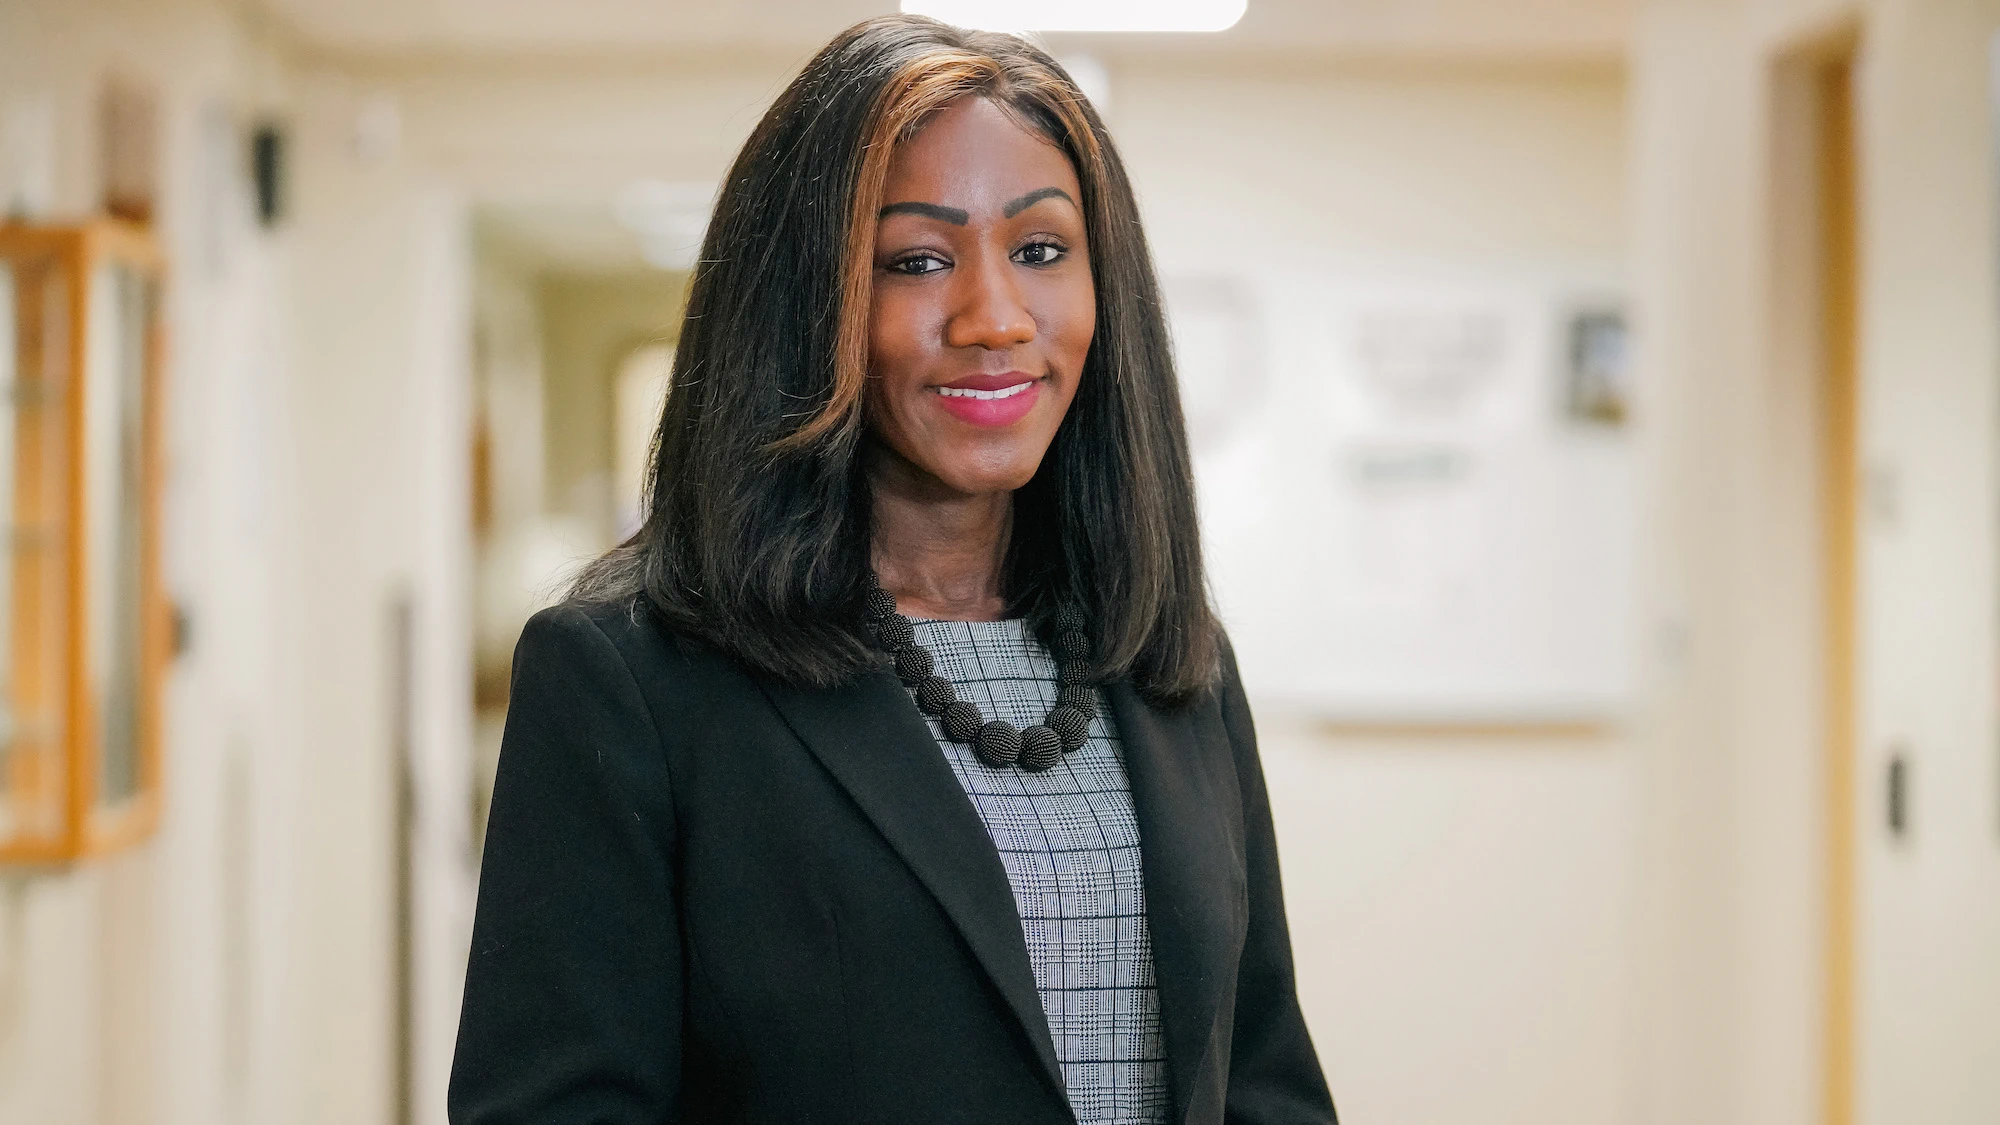 Dr. Alexis Travis, assistant provost and executive director, overseeing MSU's University Health and Wellbeing division.